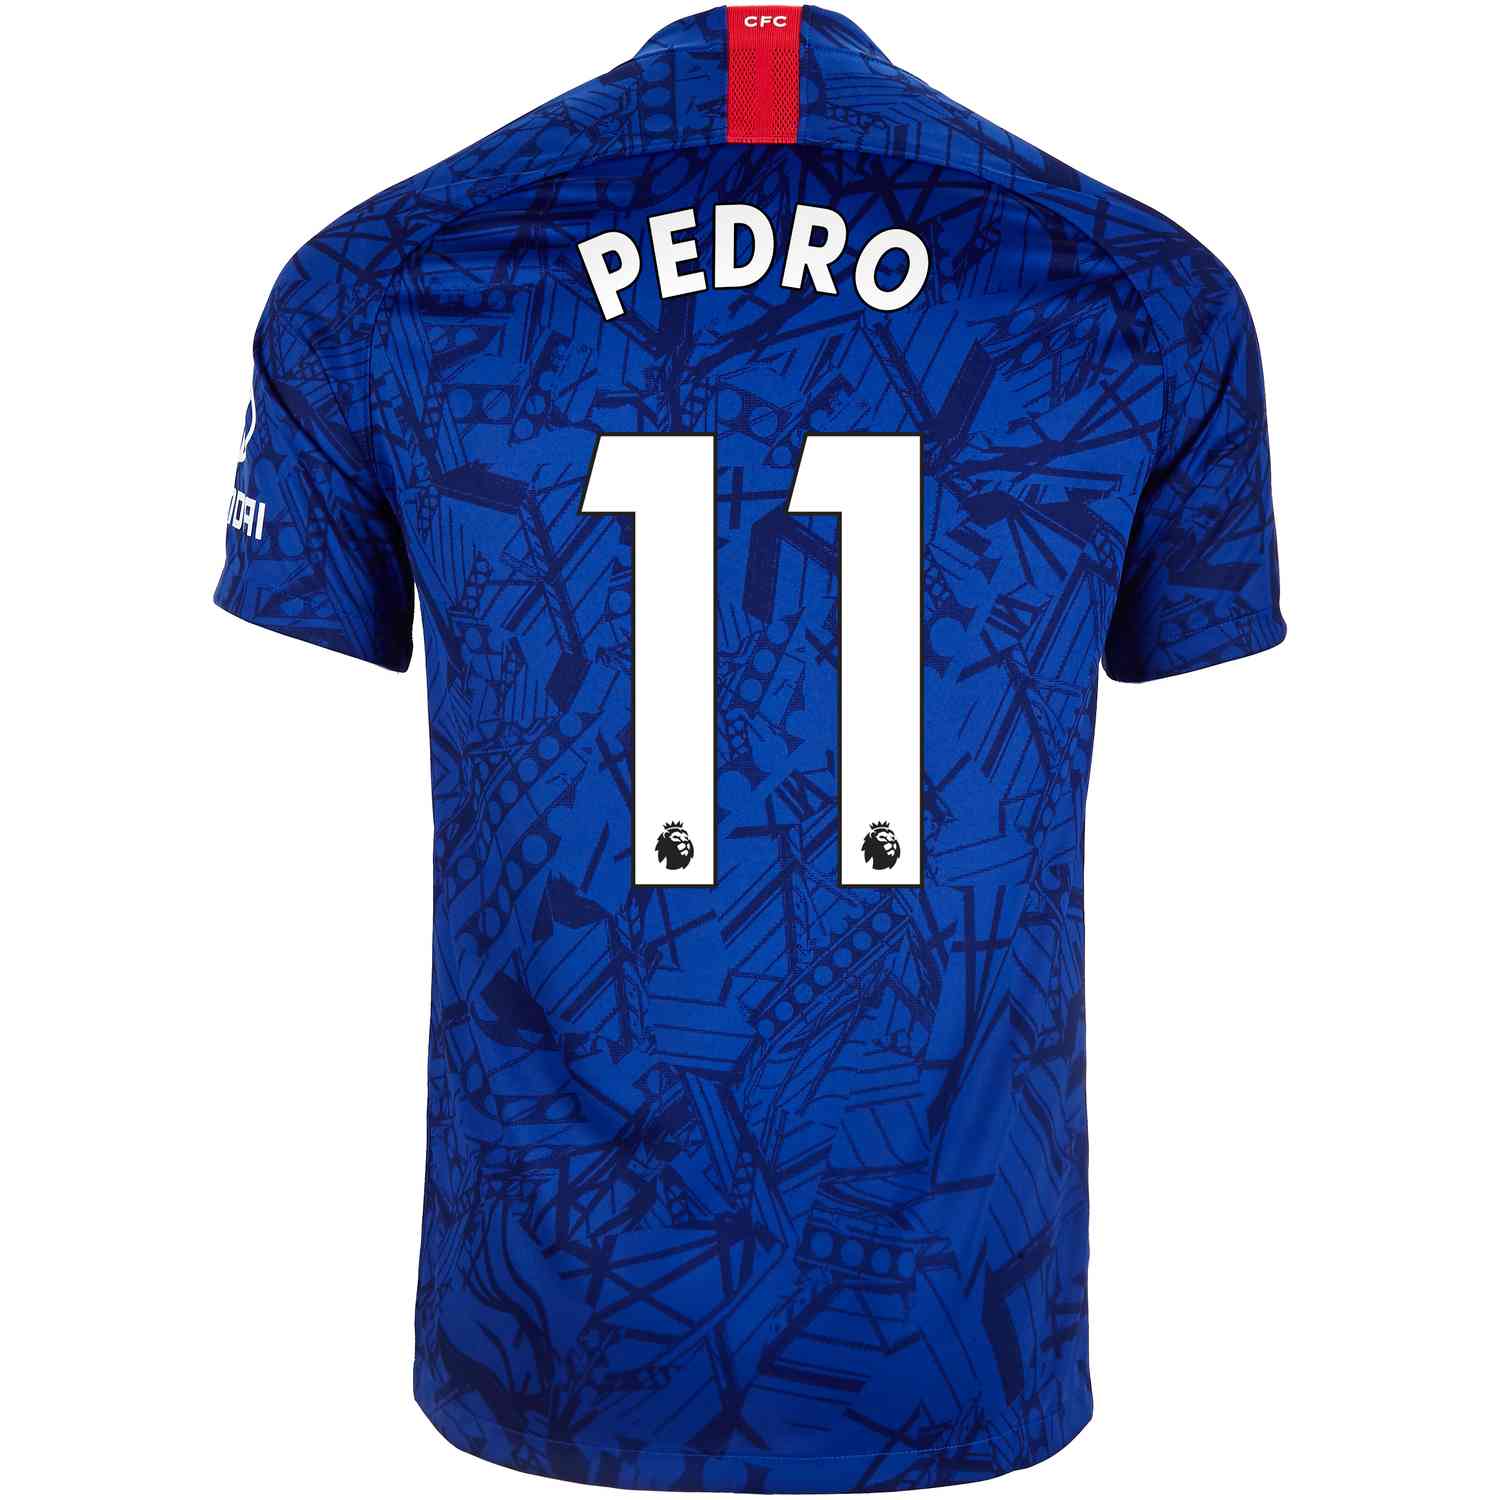 pedro jersey number